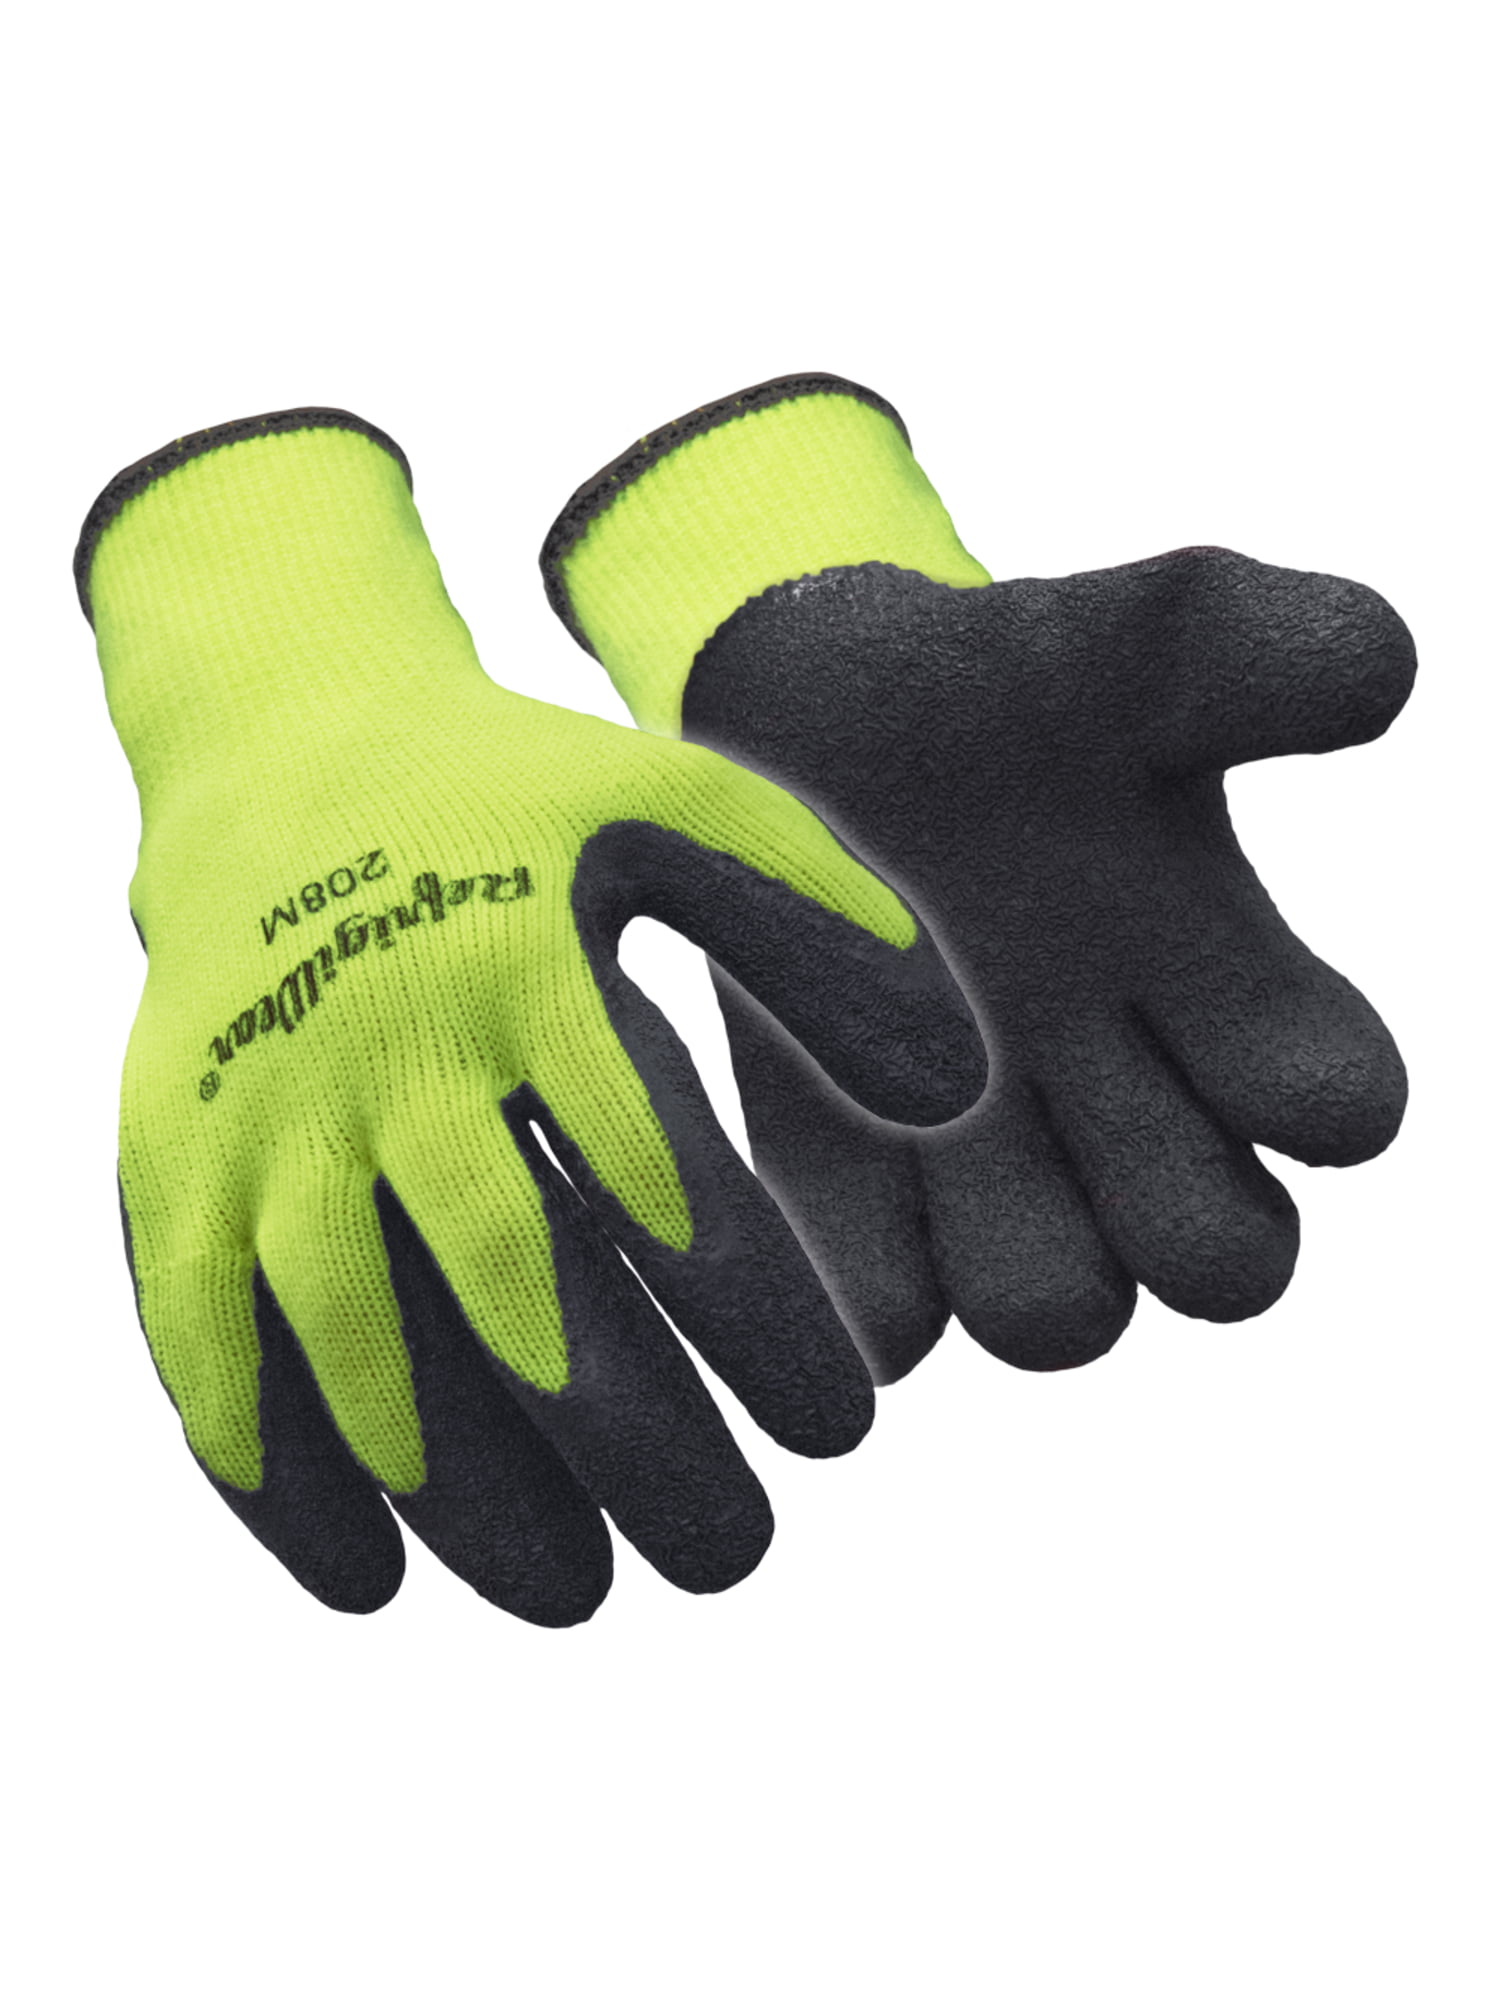 RefrigiWear Mens Thinsulate Insulated Extreme Freezer Mittens 617